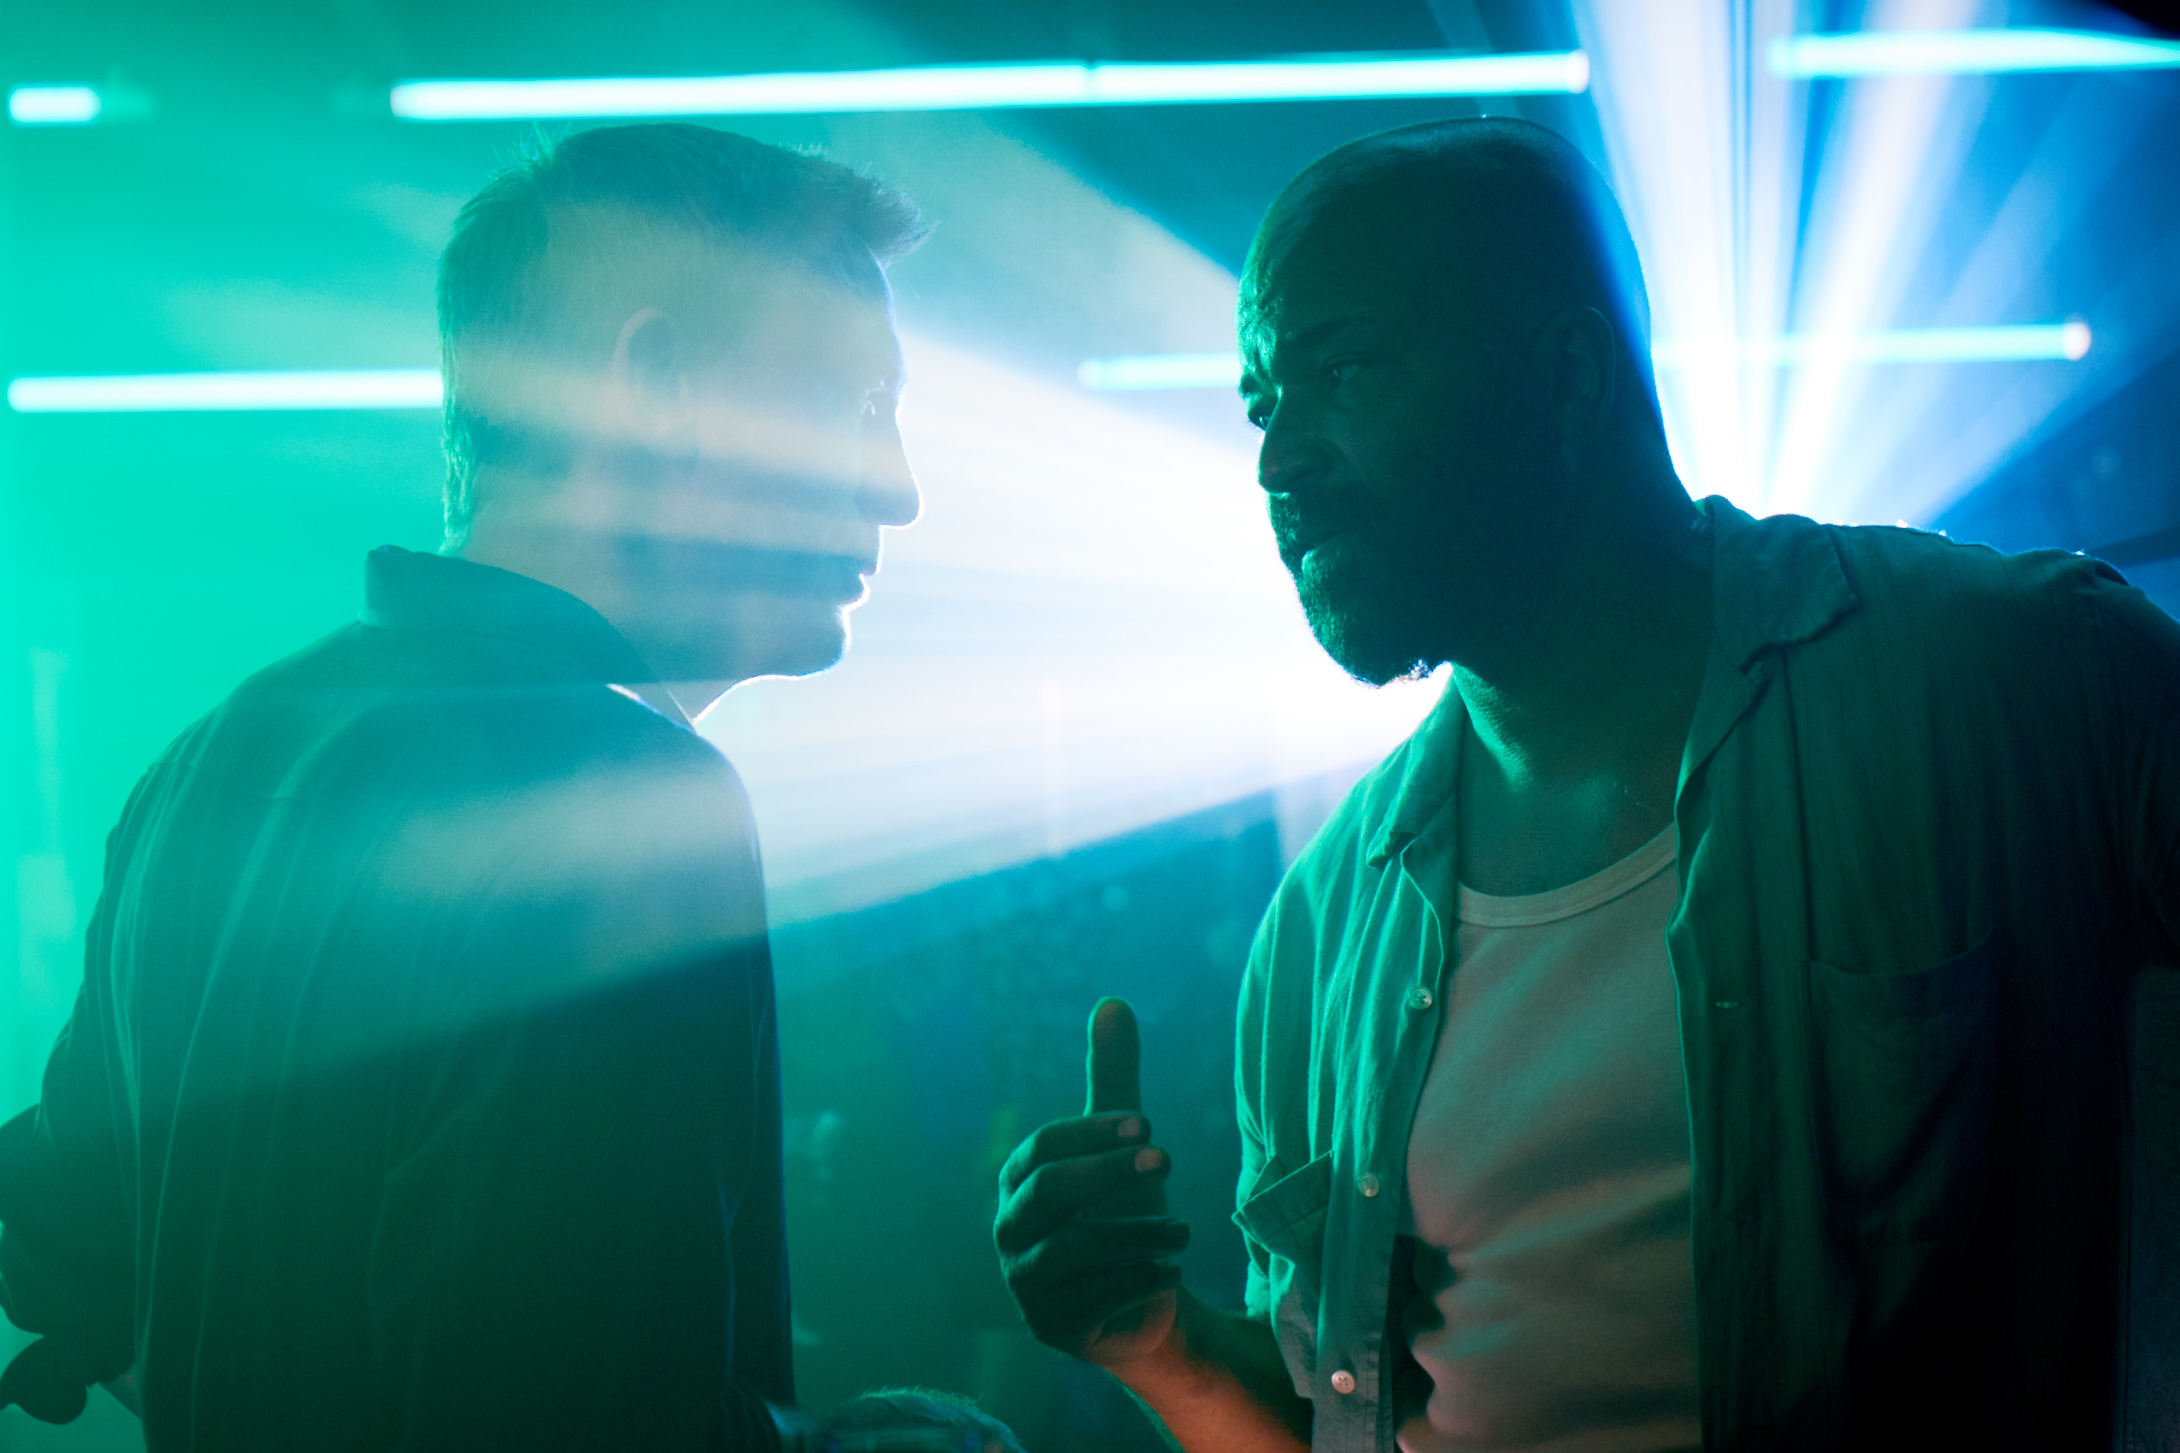 James Bond and Felix Leiter meet in a nightclub in Jamaica in No Time To Die